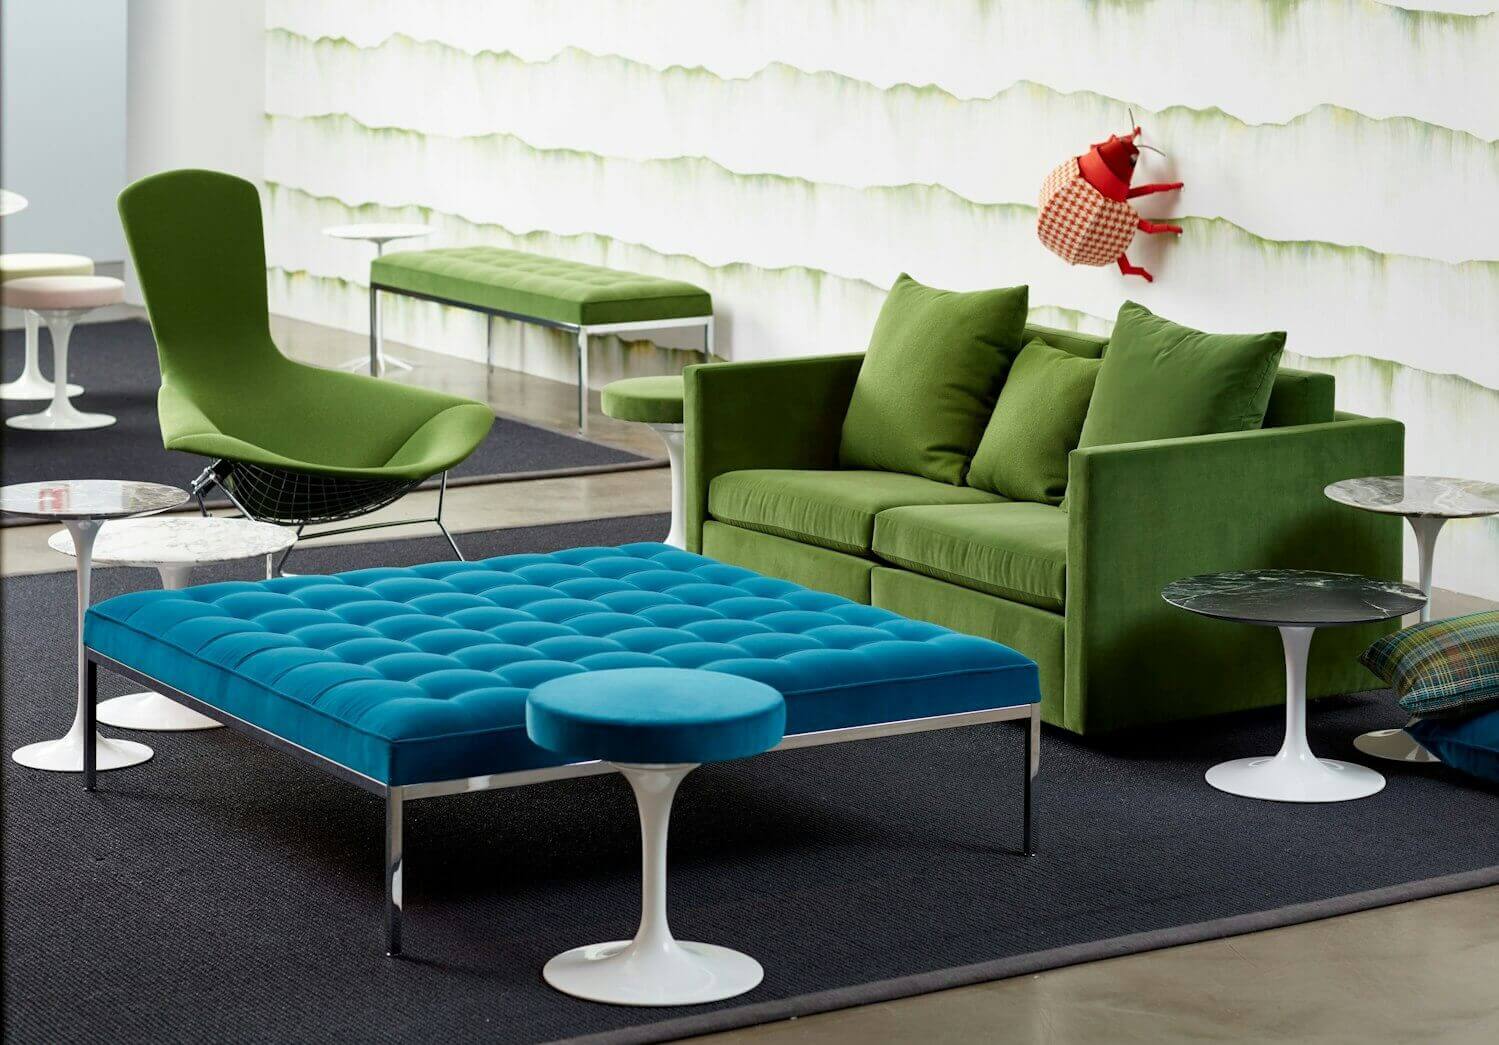 Florence Knoll Relaxed Bench with side tables and a sofa